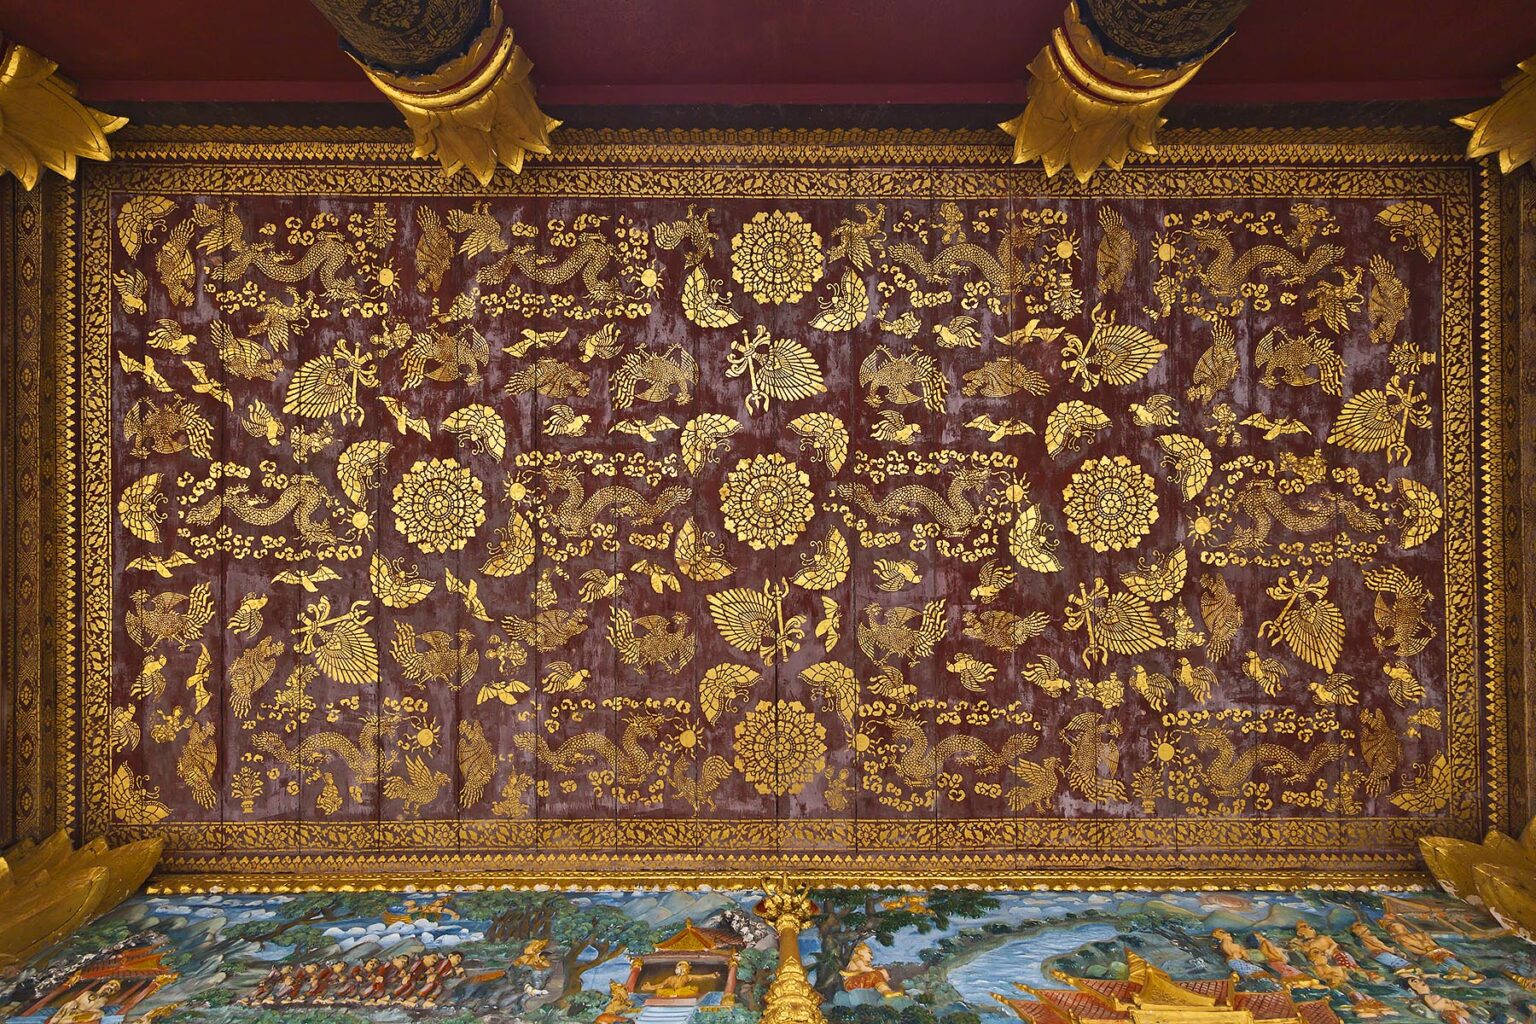 Stenciled DRAGON & PHOENIX ceiling designs on a BUDDHIST TEMPLE - LUANG PRABANG, LAOS